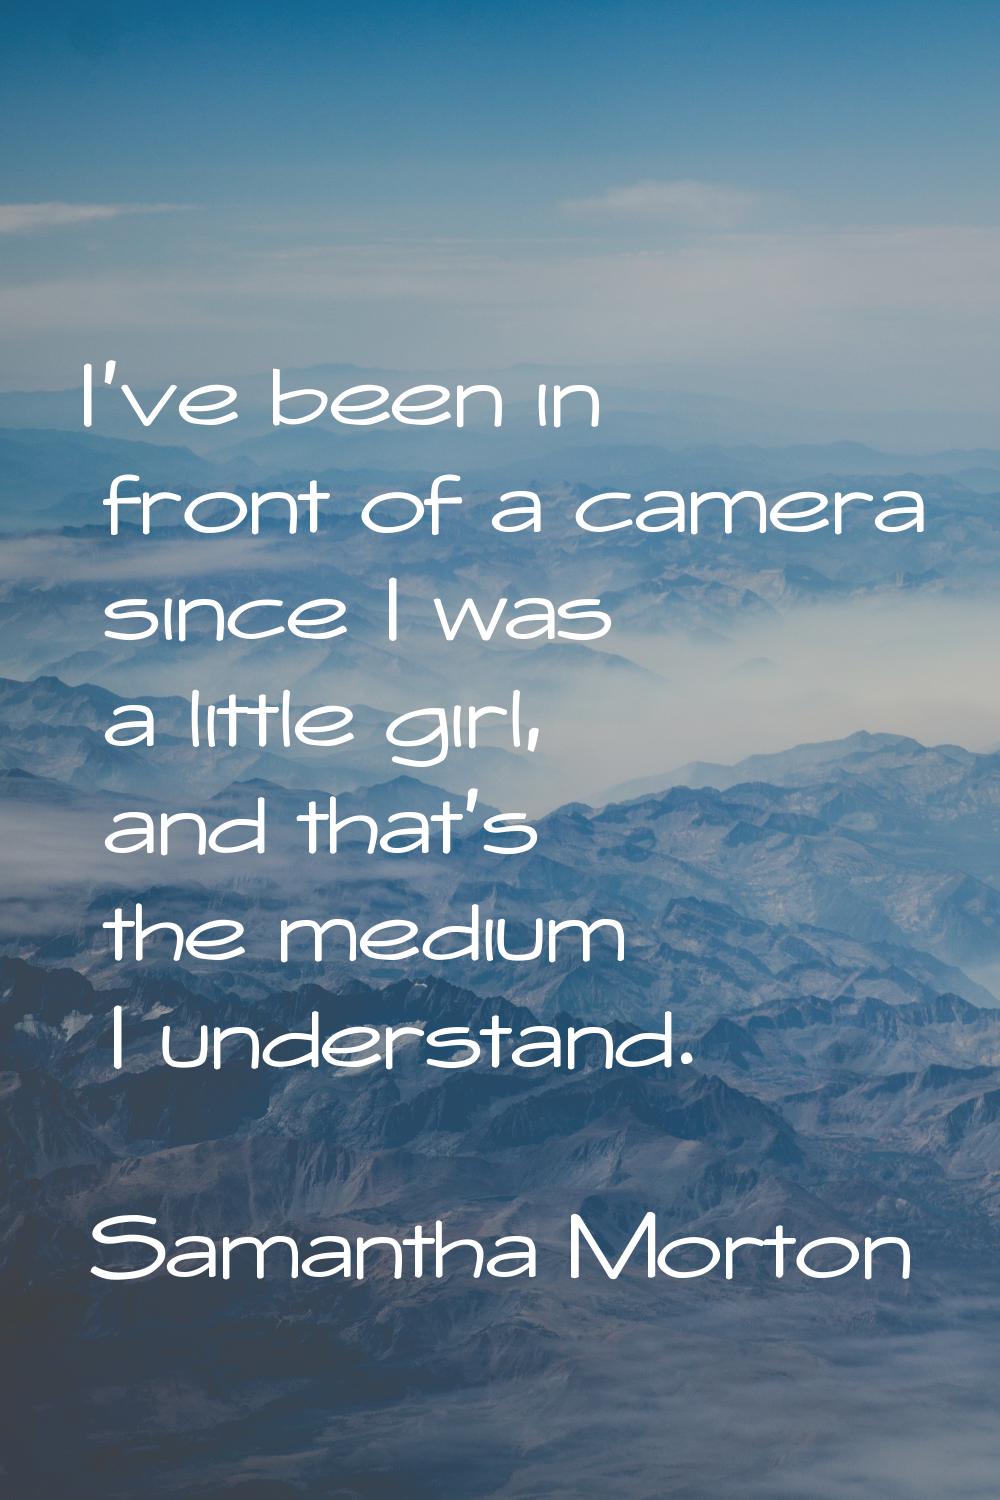 I've been in front of a camera since I was a little girl, and that's the medium I understand.